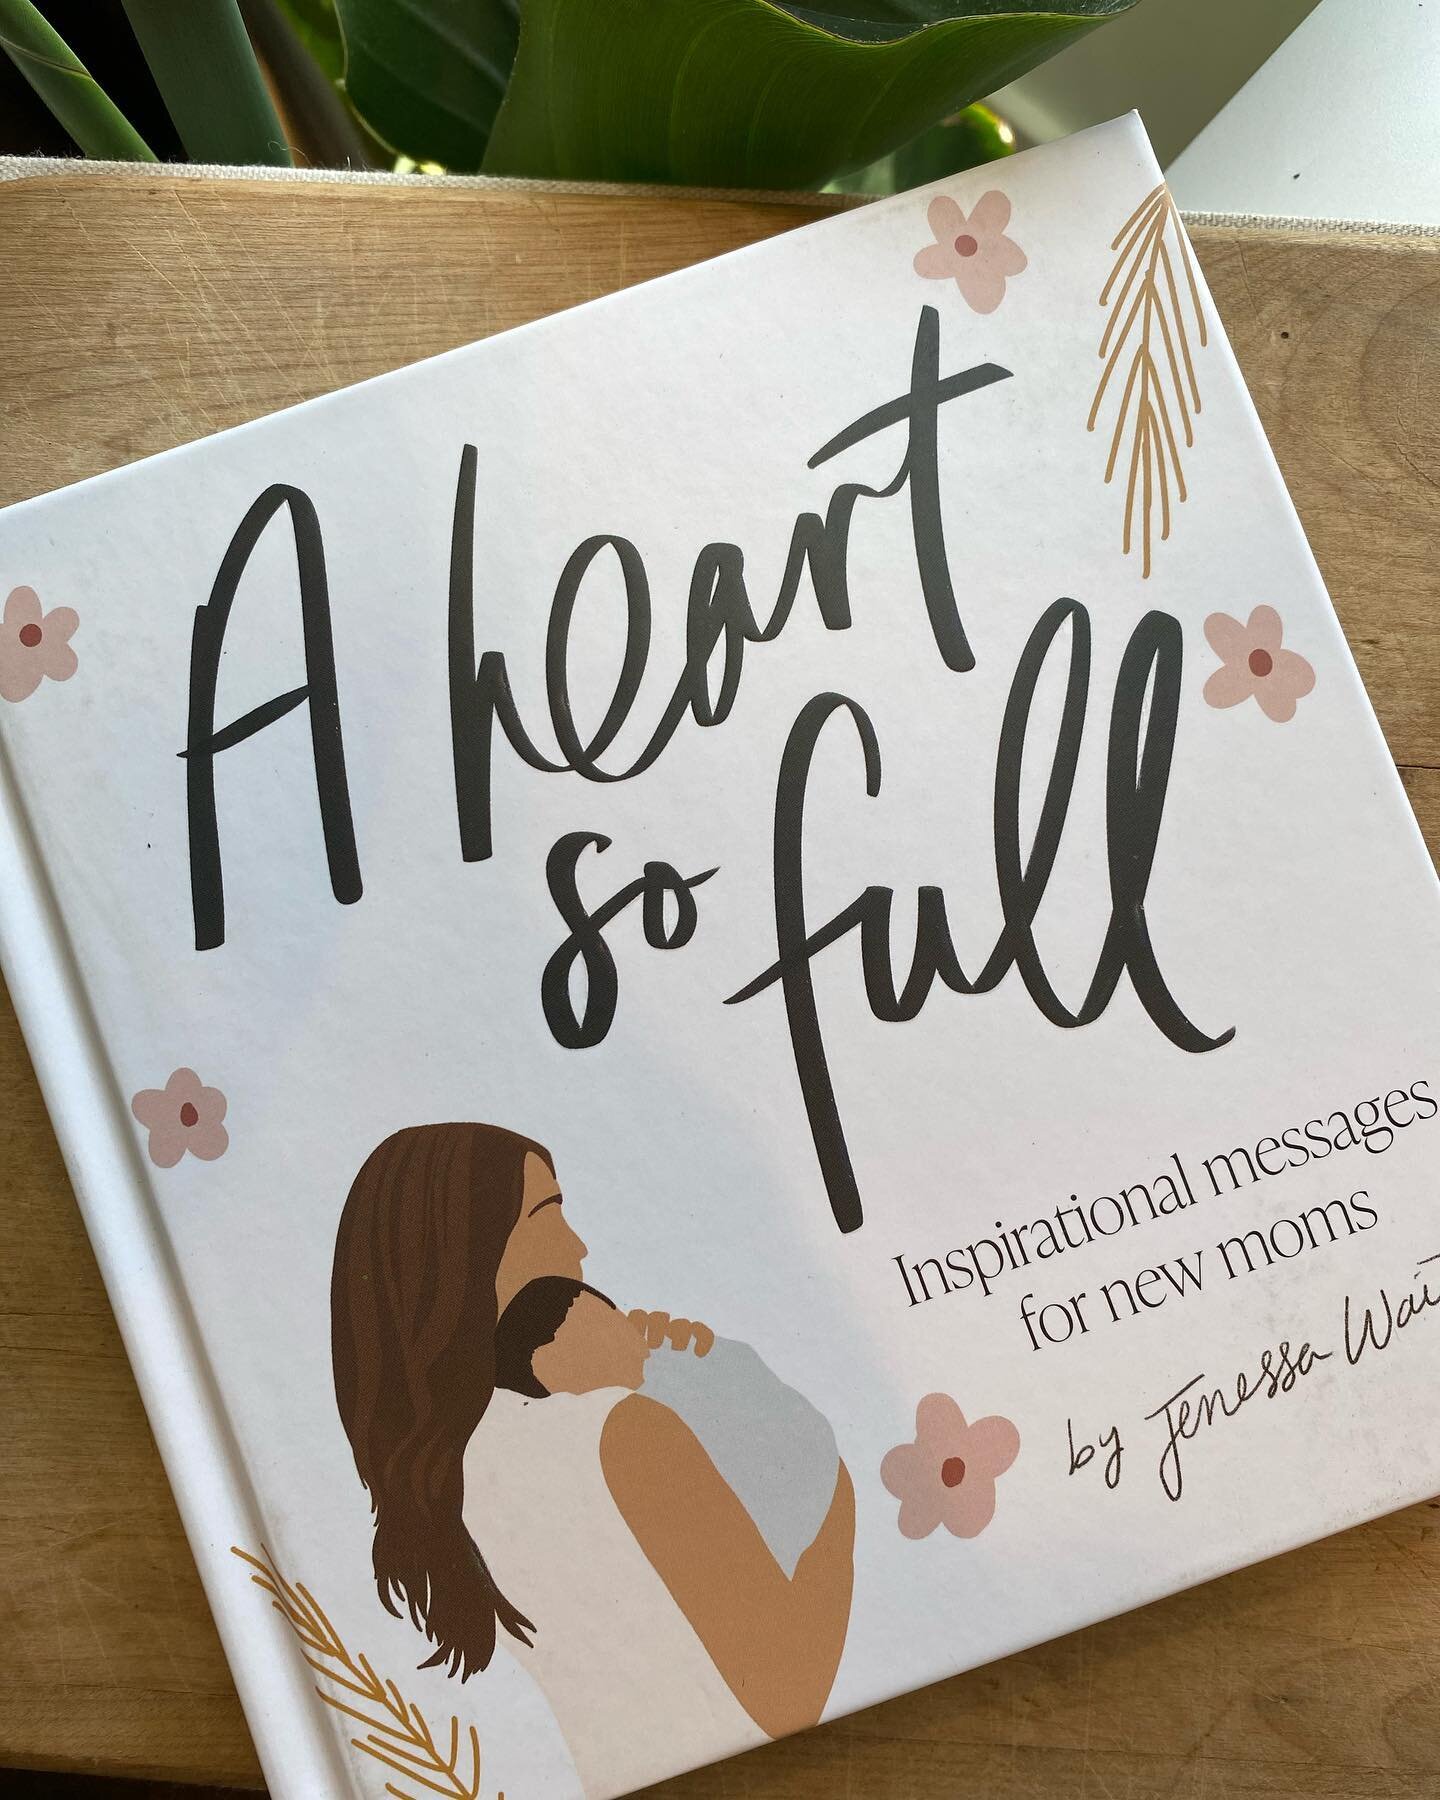 A gift for new moms on Mother&rsquo;s Day, for a baby shower or any occasion!

Becoming a new mom comes with unique challenges: a changing routine, a recovering body, and a transitioning role. A Heart So Full guides you through the fourth trimester w